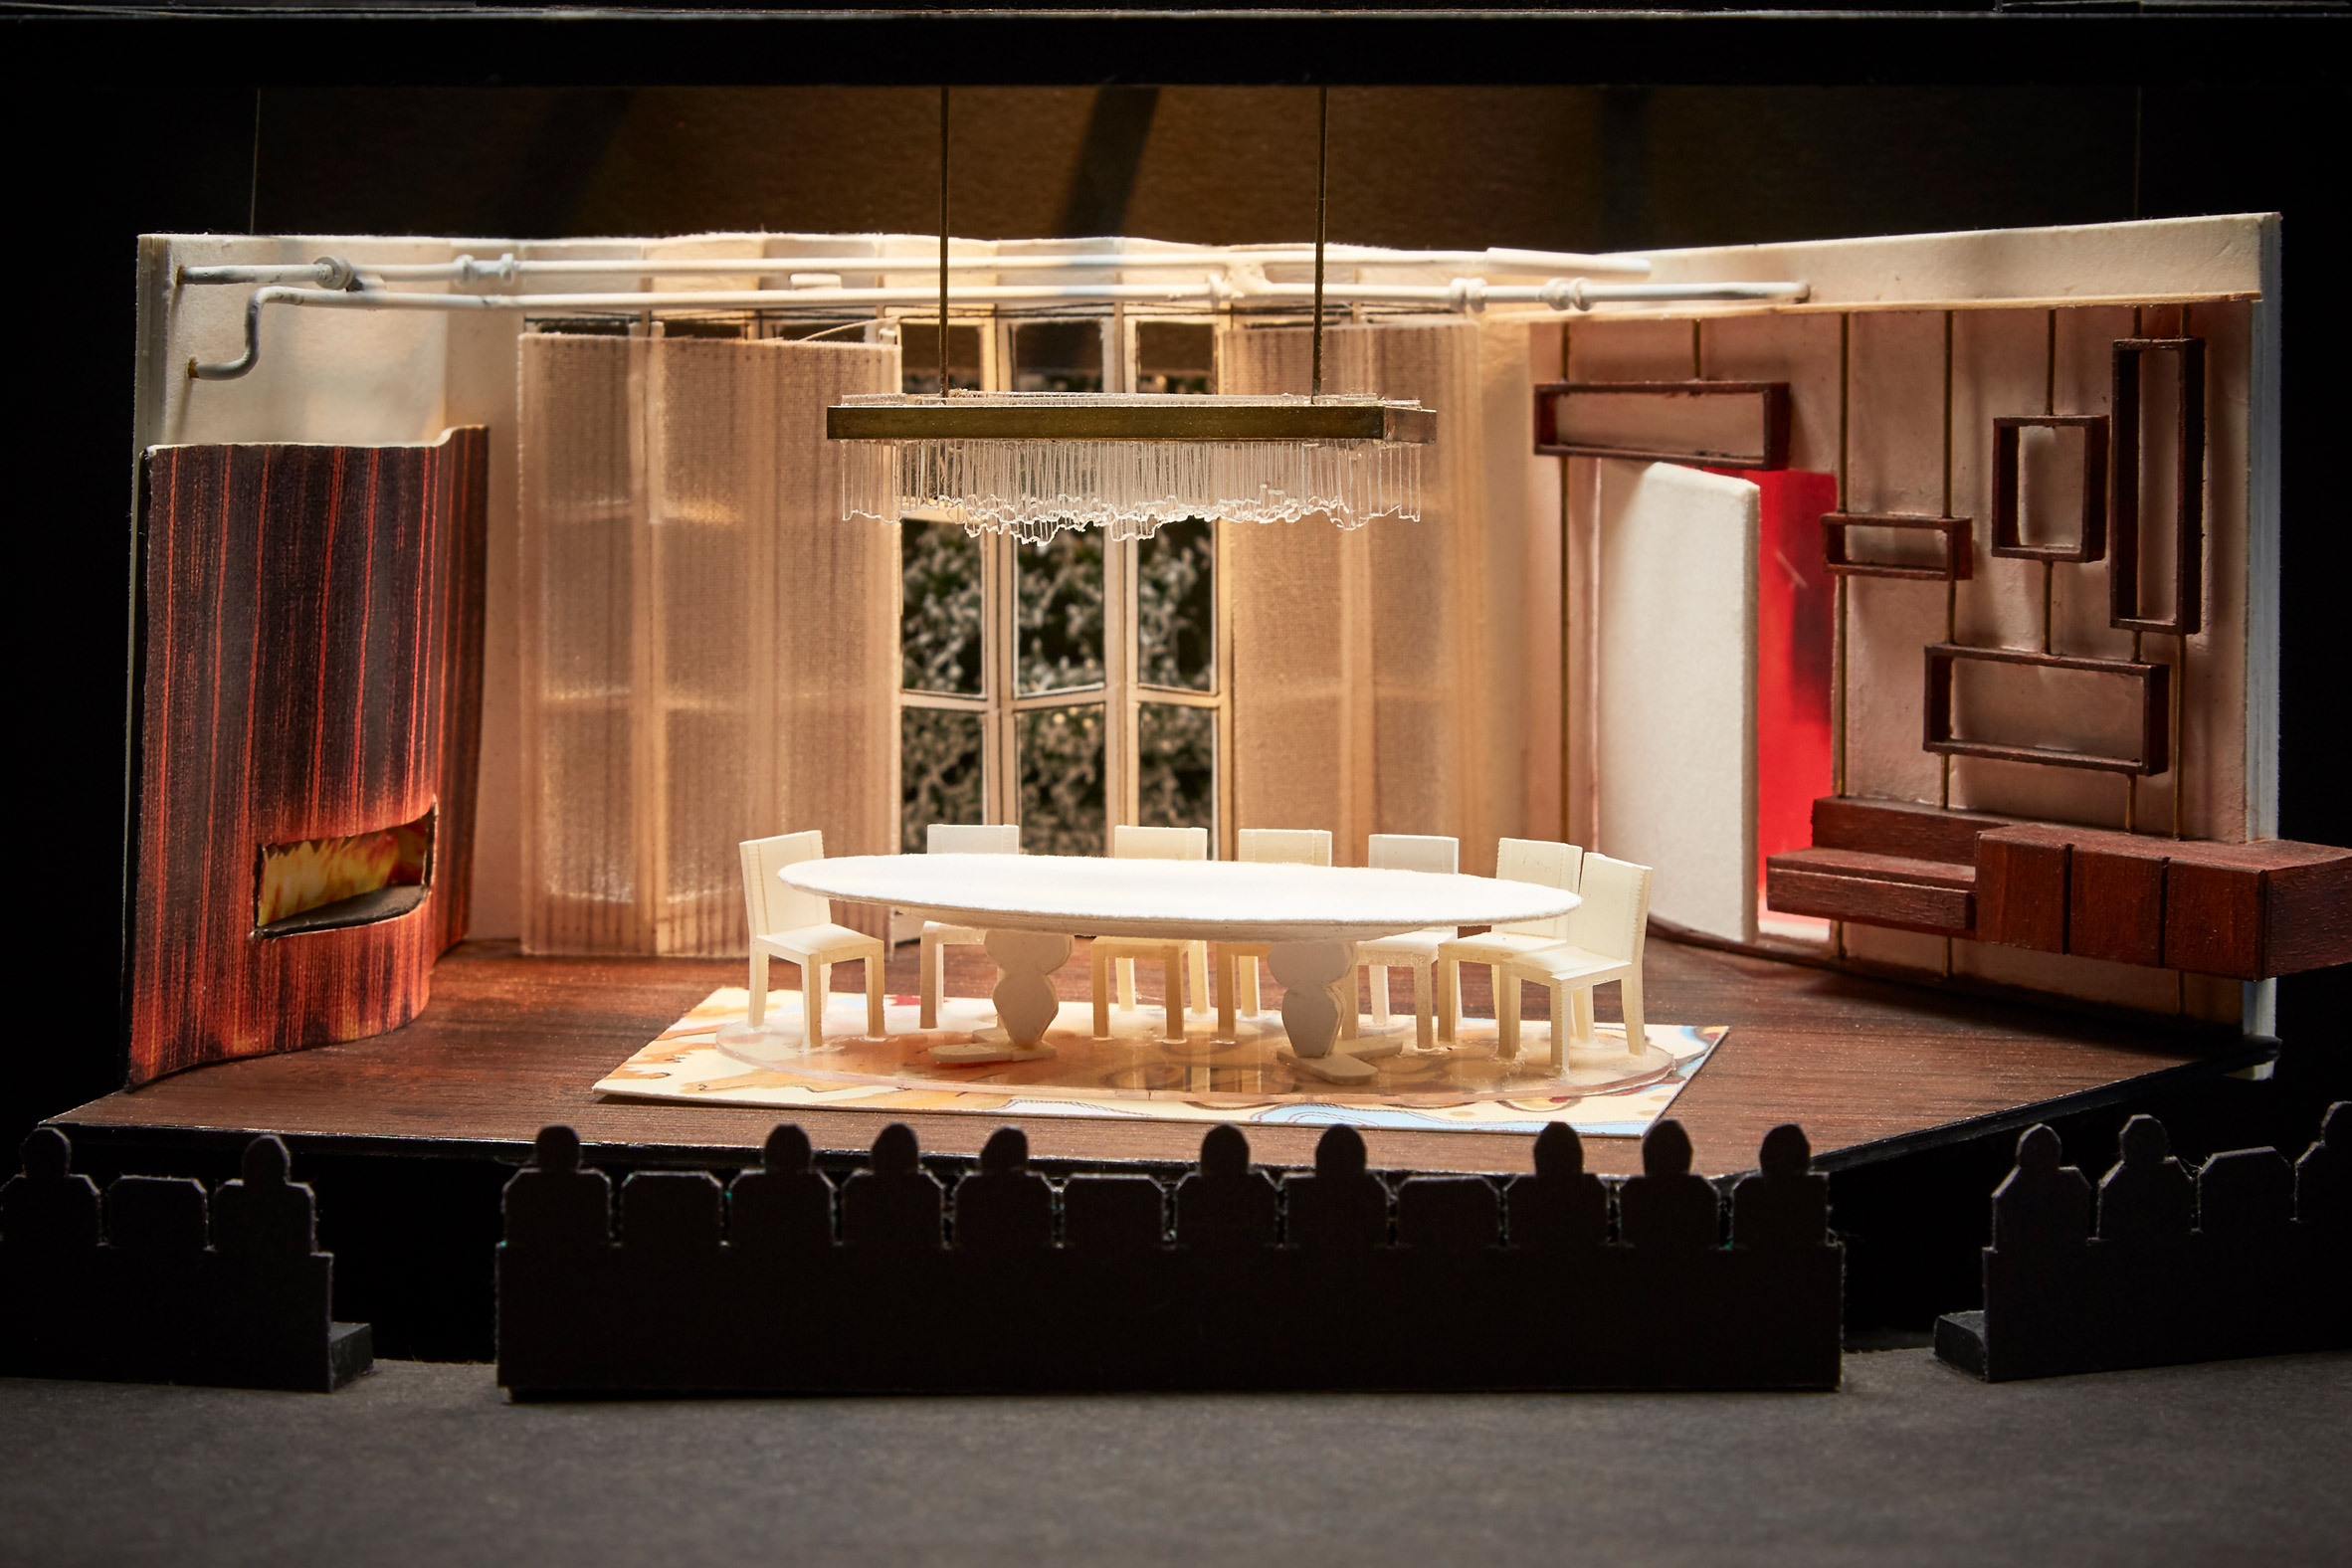 David Rockwell Shares Photographs Of Detailed Theatre Set Models